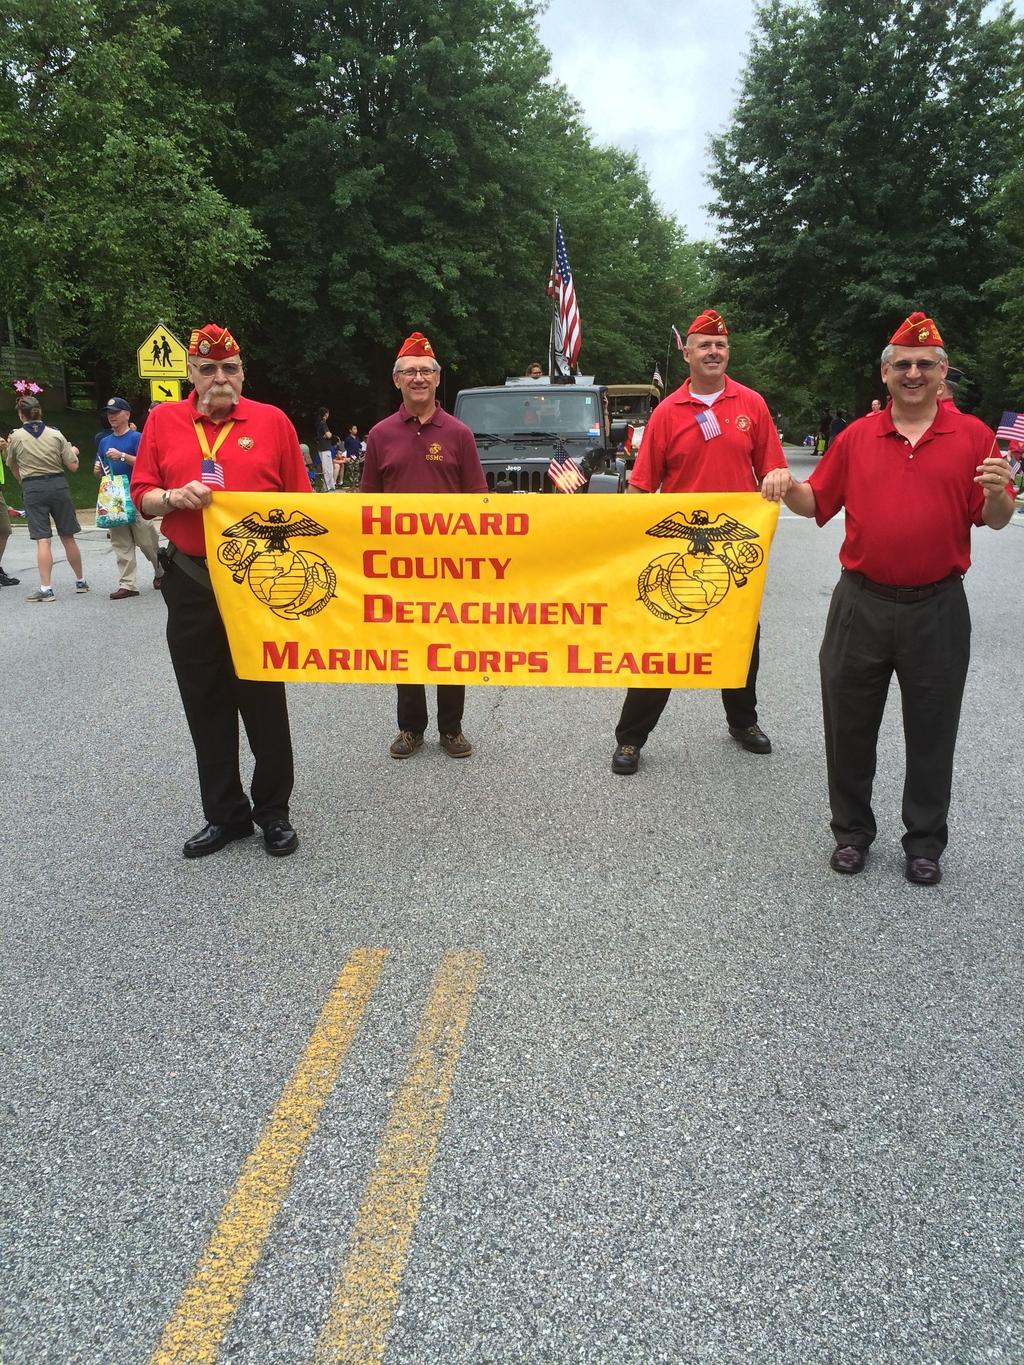 SSgt Taylor Det 1084 marched in the River Hill community paradeon Independence Day.